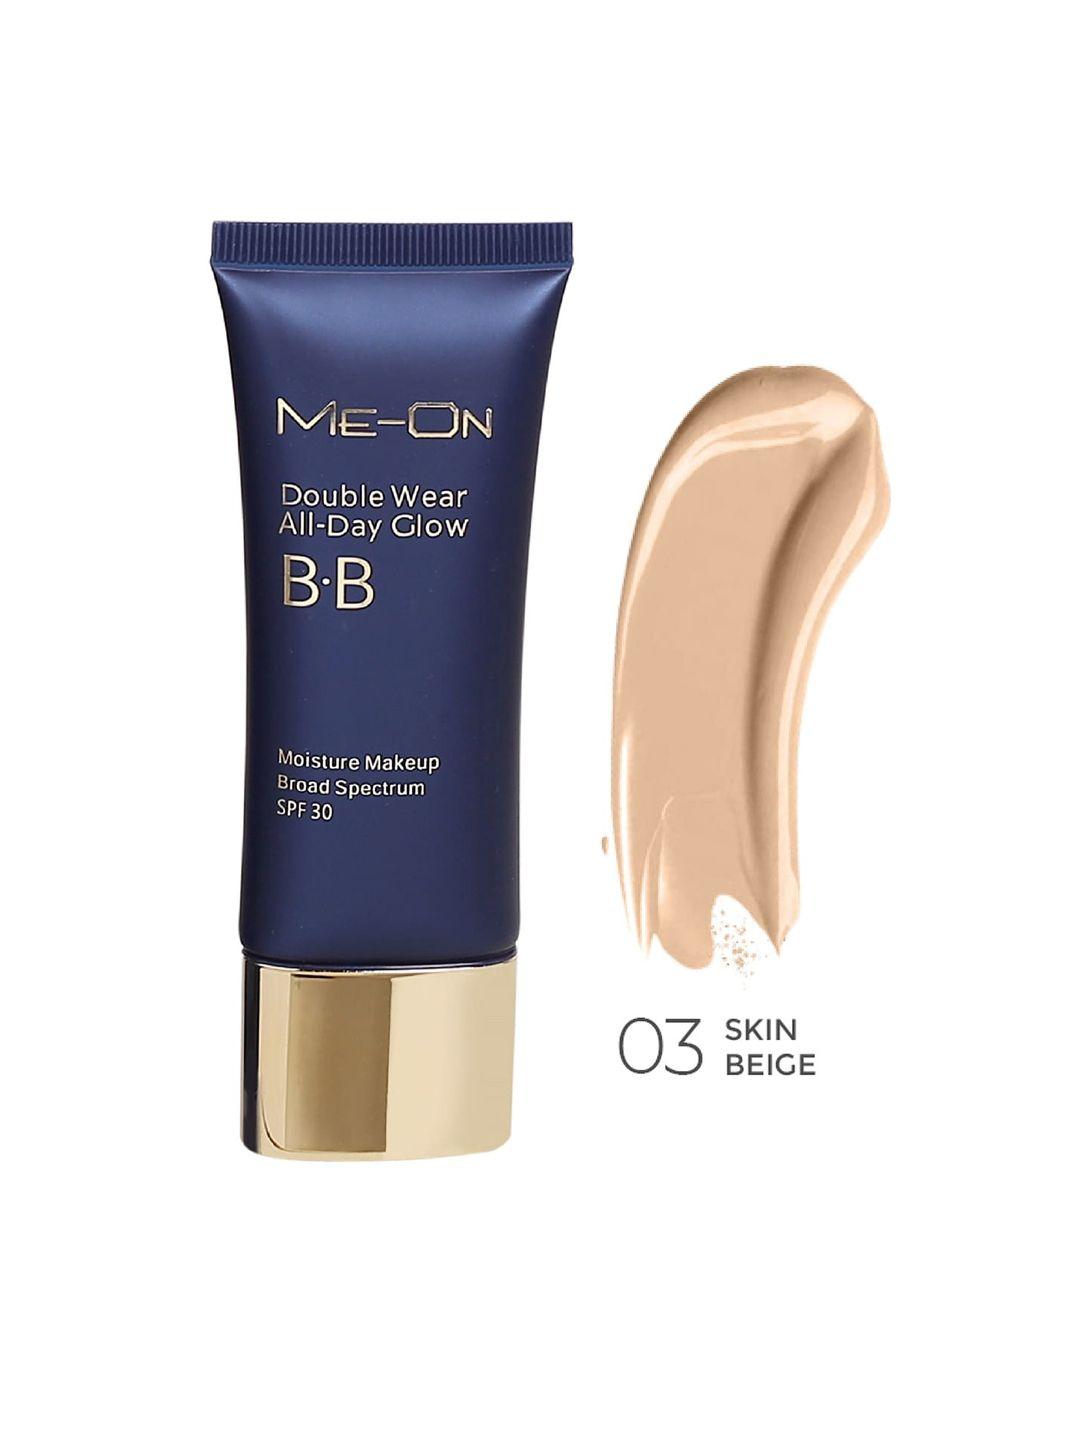 me-on double wear all-day glow spf30 bb cream foundation - shade 21